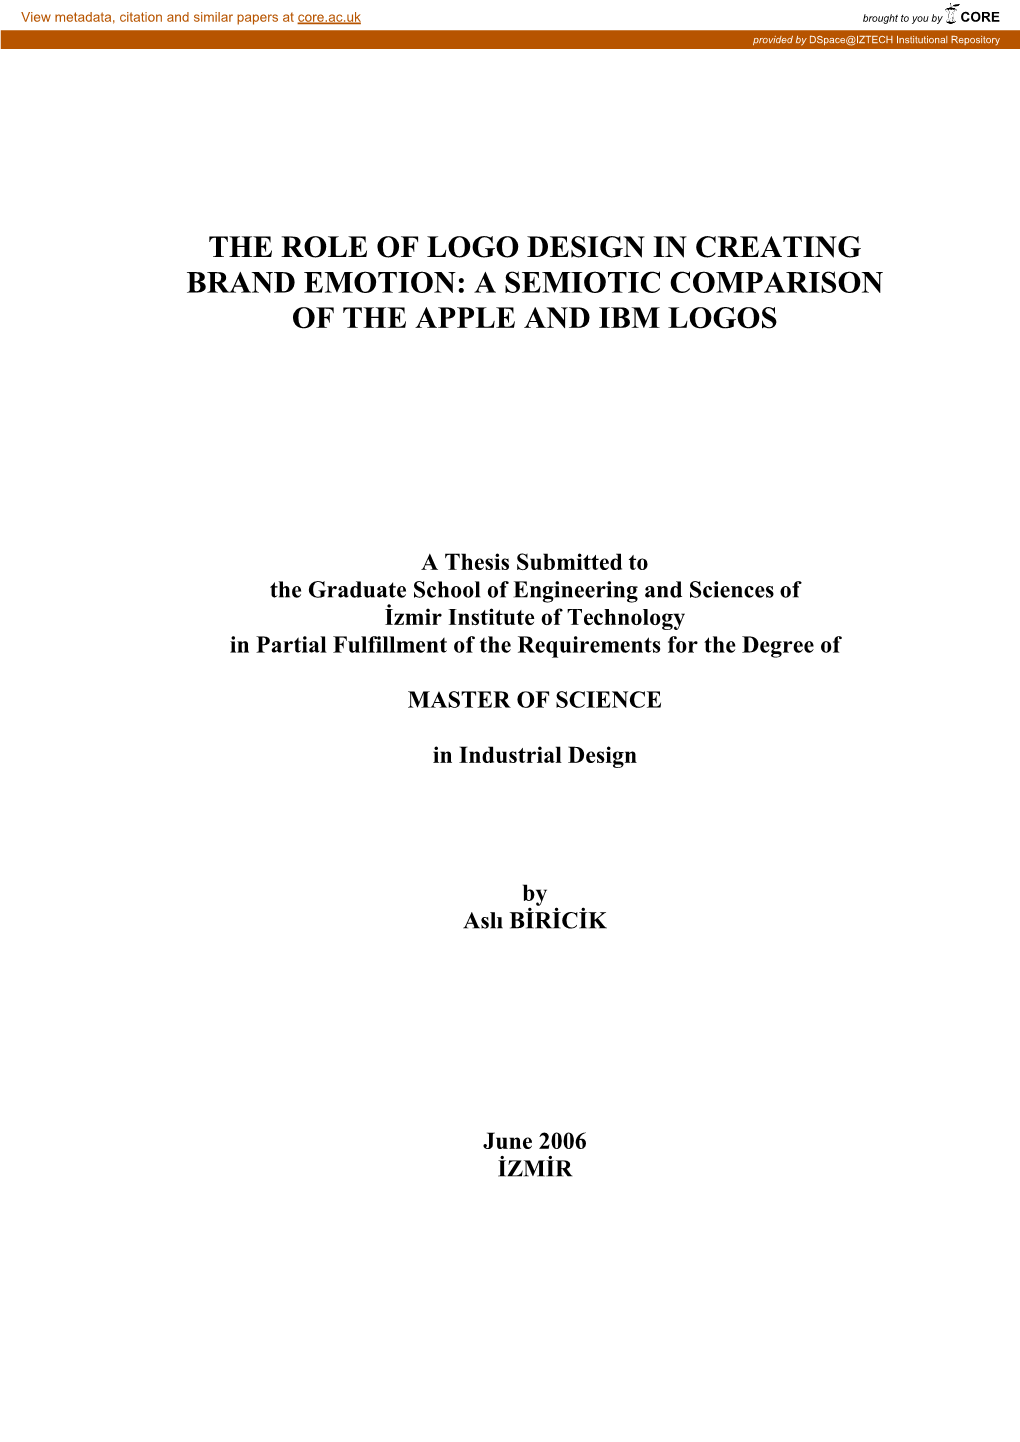 The Role of Logo Design in Creating Brand Emotion: a Semiotic Comparison of the Apple and Ibm Logos